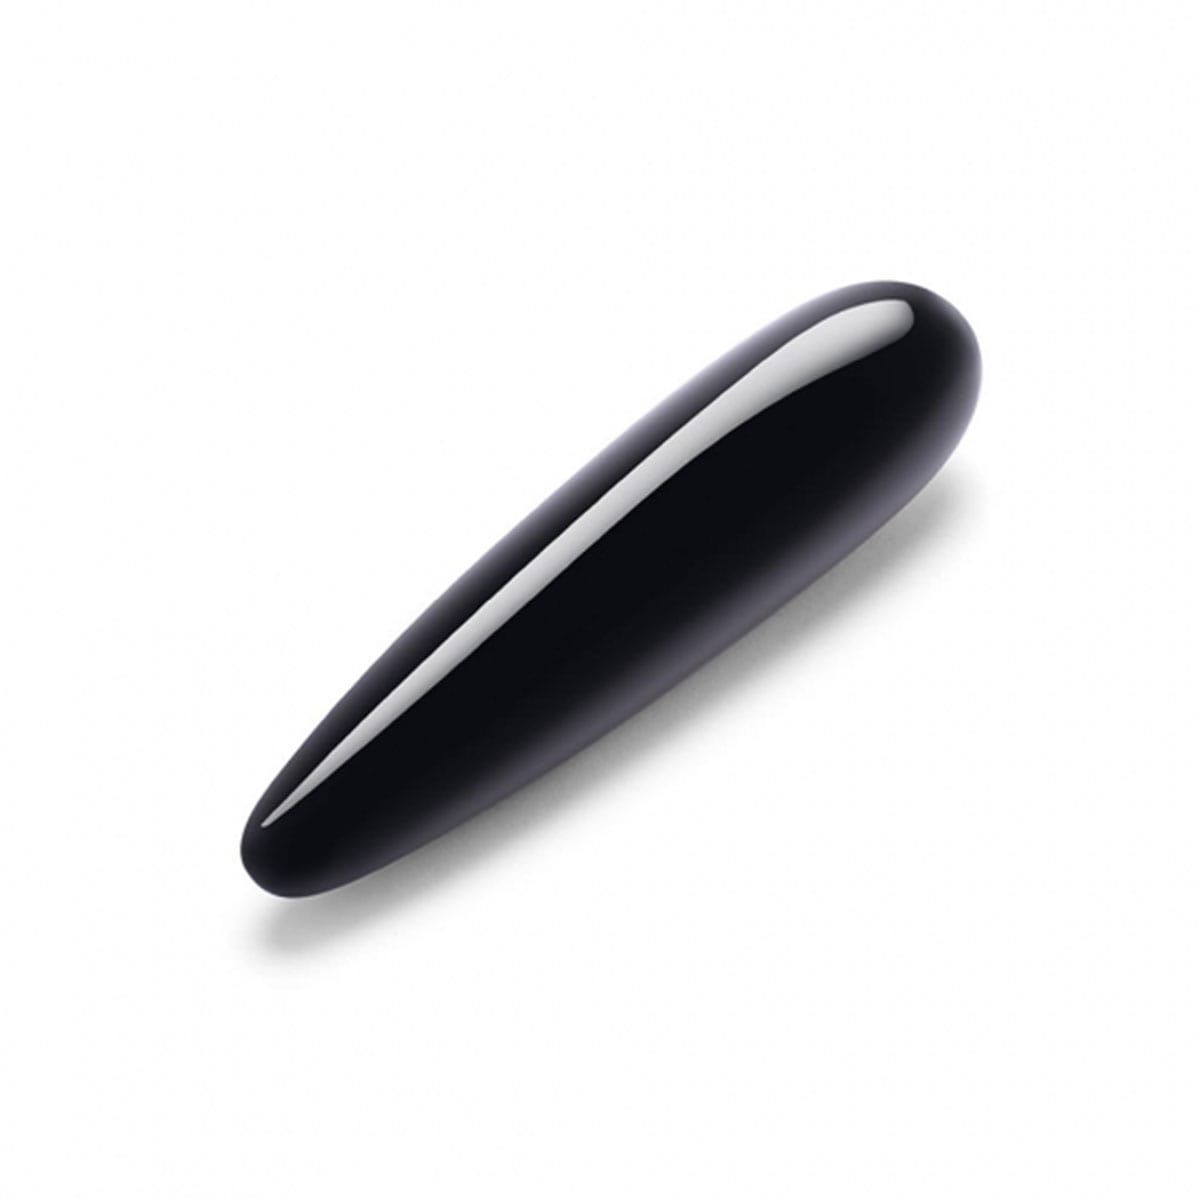 Buy Le Wand Crystal Wand   Black Obsidian 7.00 long and 1.6 in thick dildo made by Le Wand.